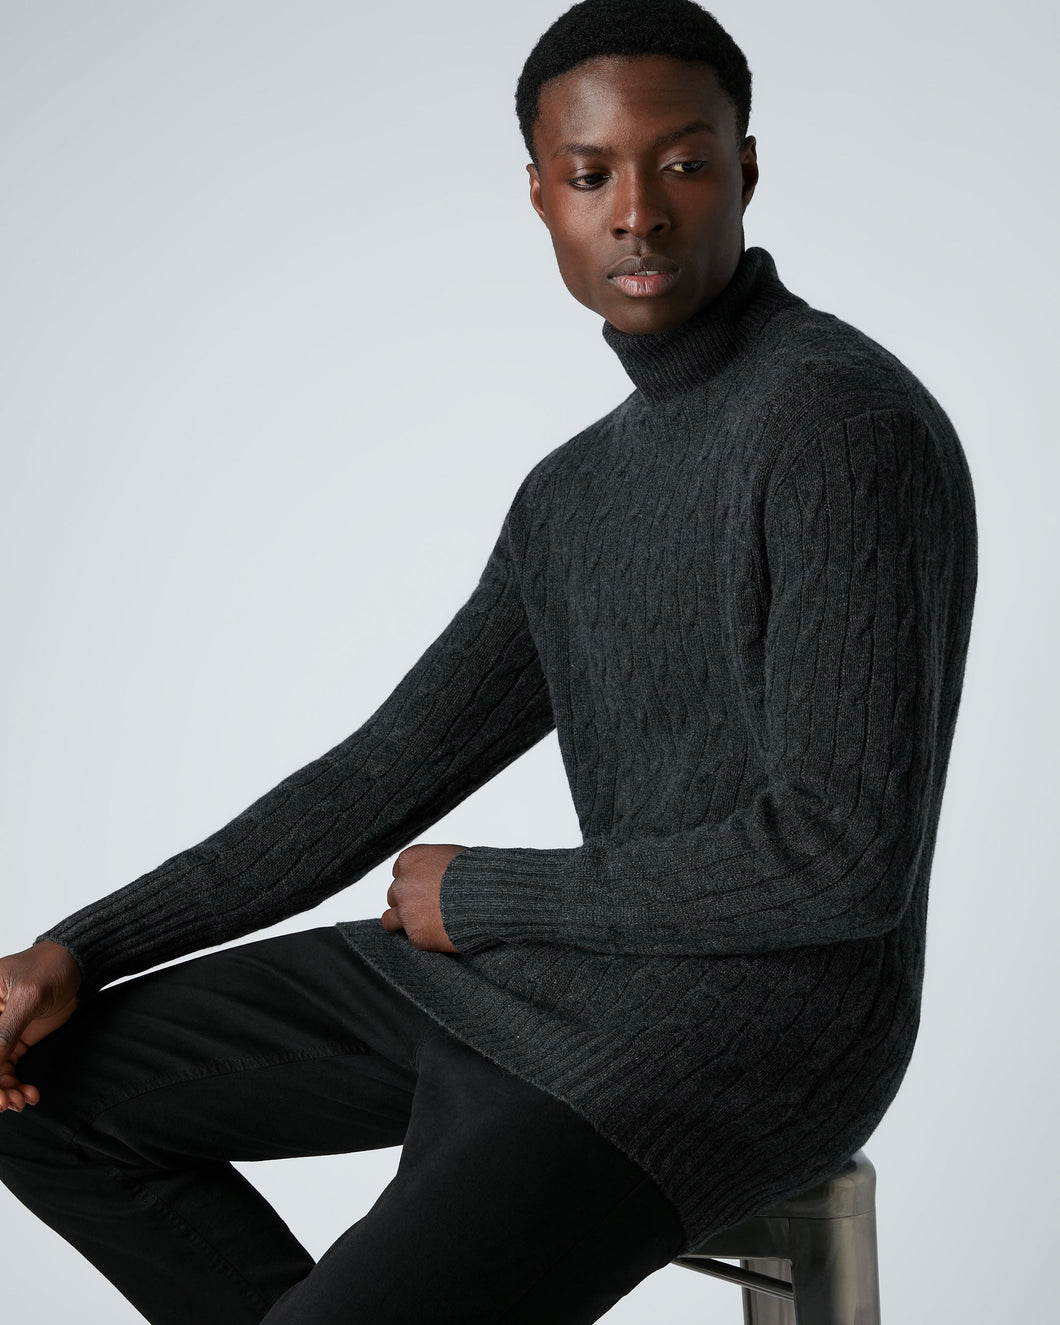 N.Peal Men's Classic Cable Roll Neck Cashmere Jumper Dark Charcoal Grey